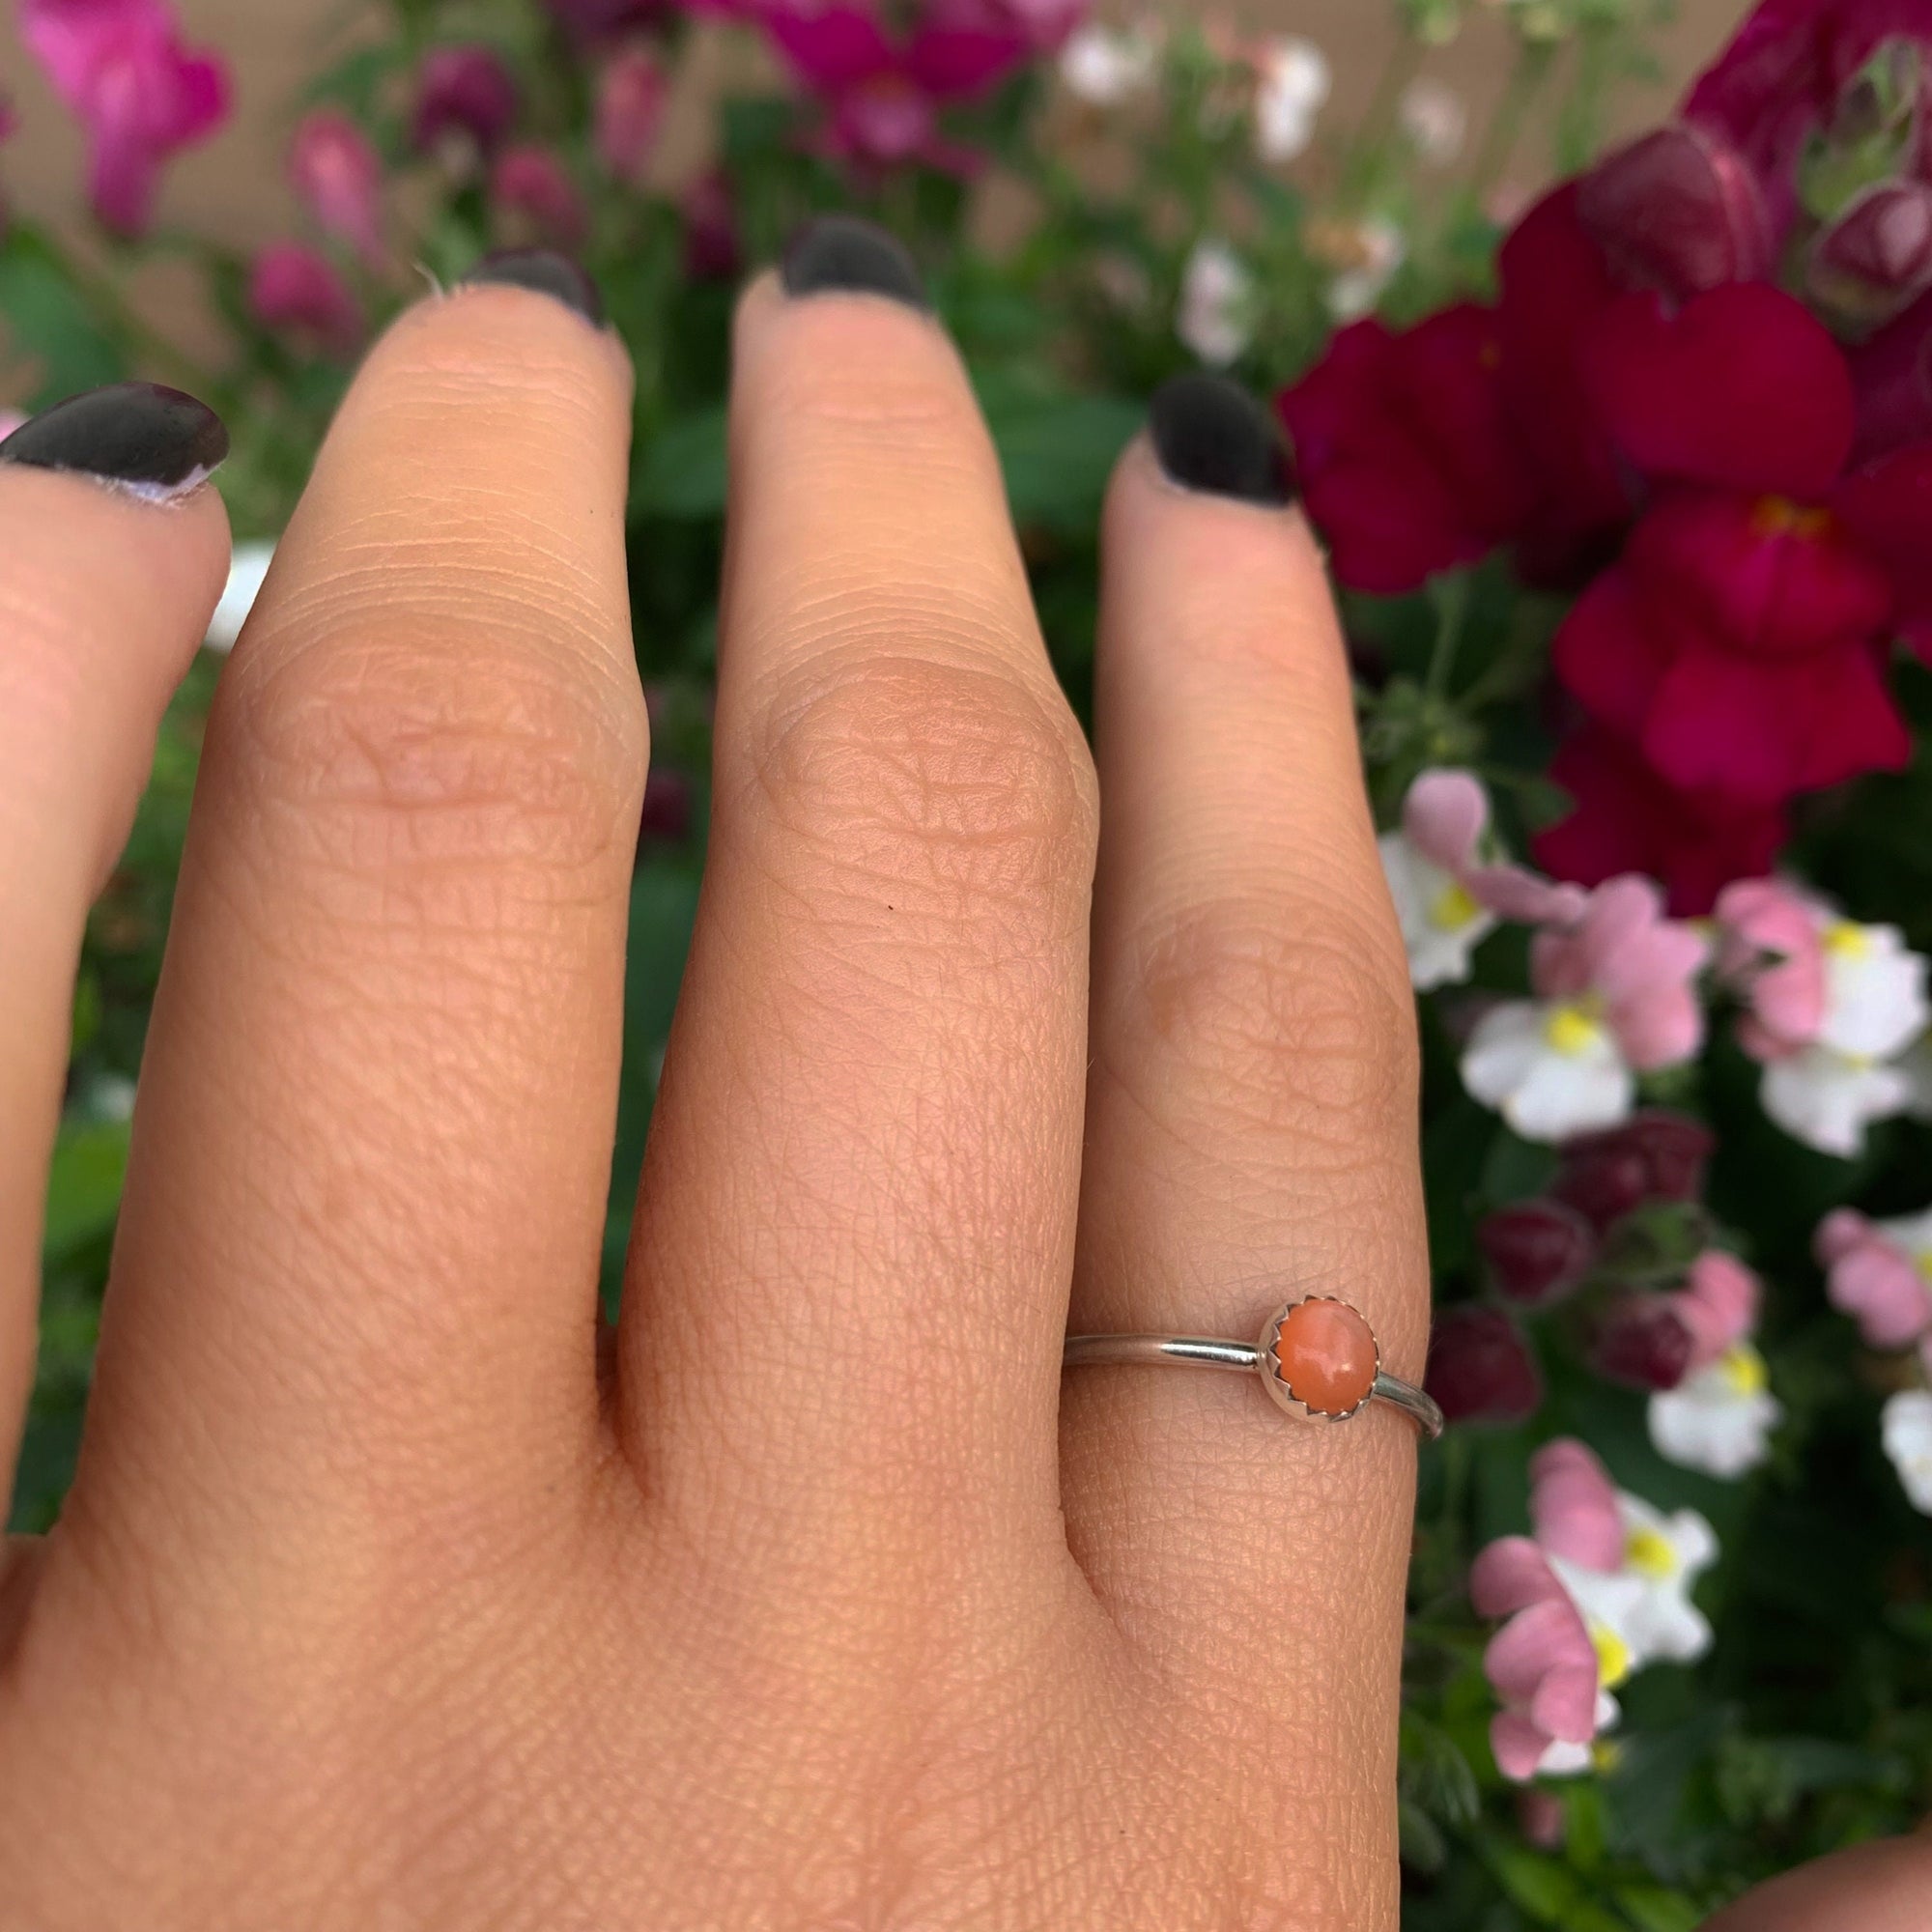 Peach Moonstone Stacking Rings - Sterling Silver 